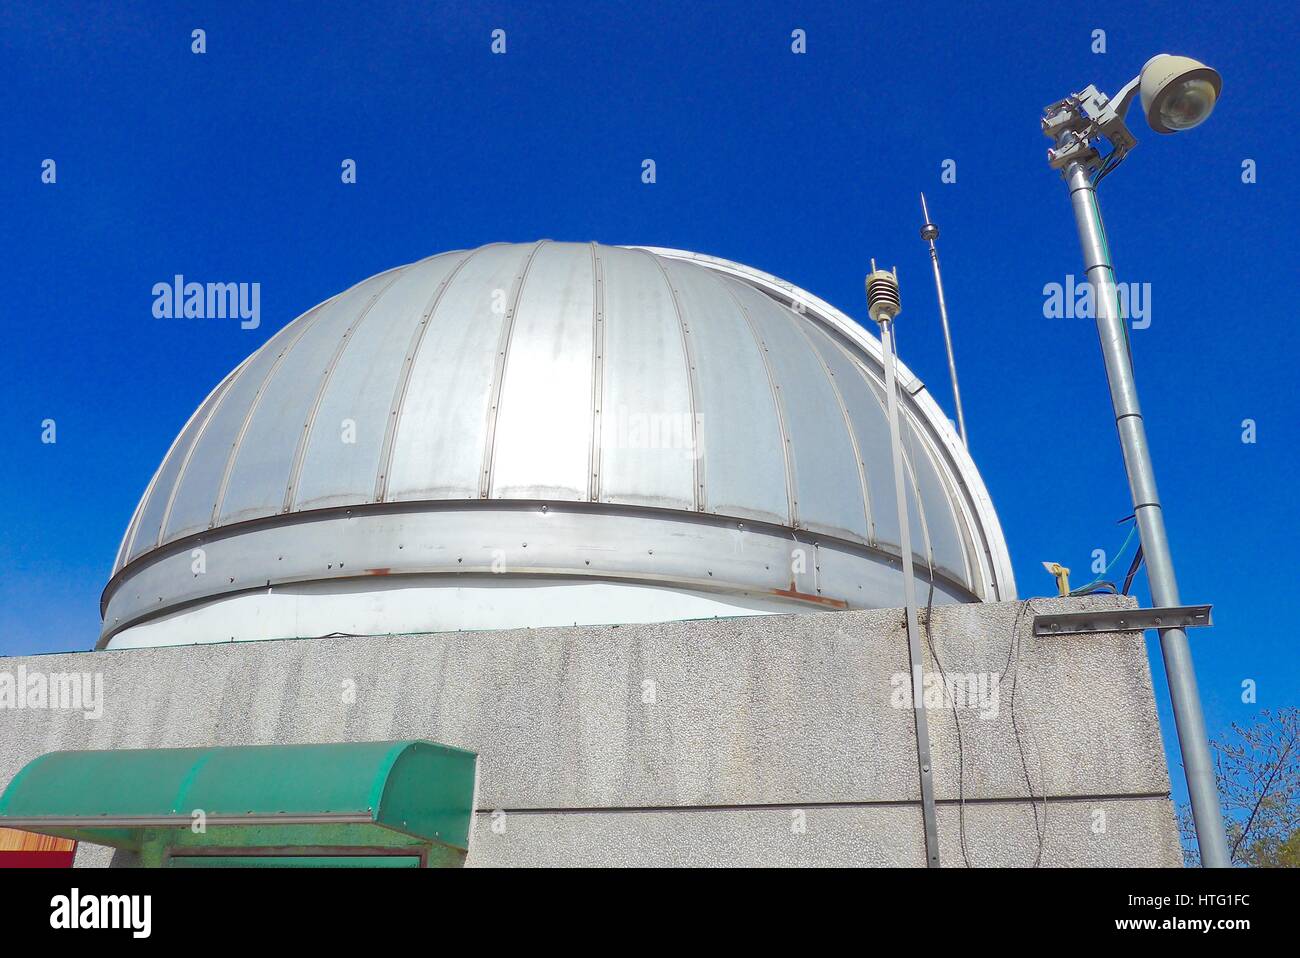 Astronomical observatory dome closeup in blue sky Stock Photo